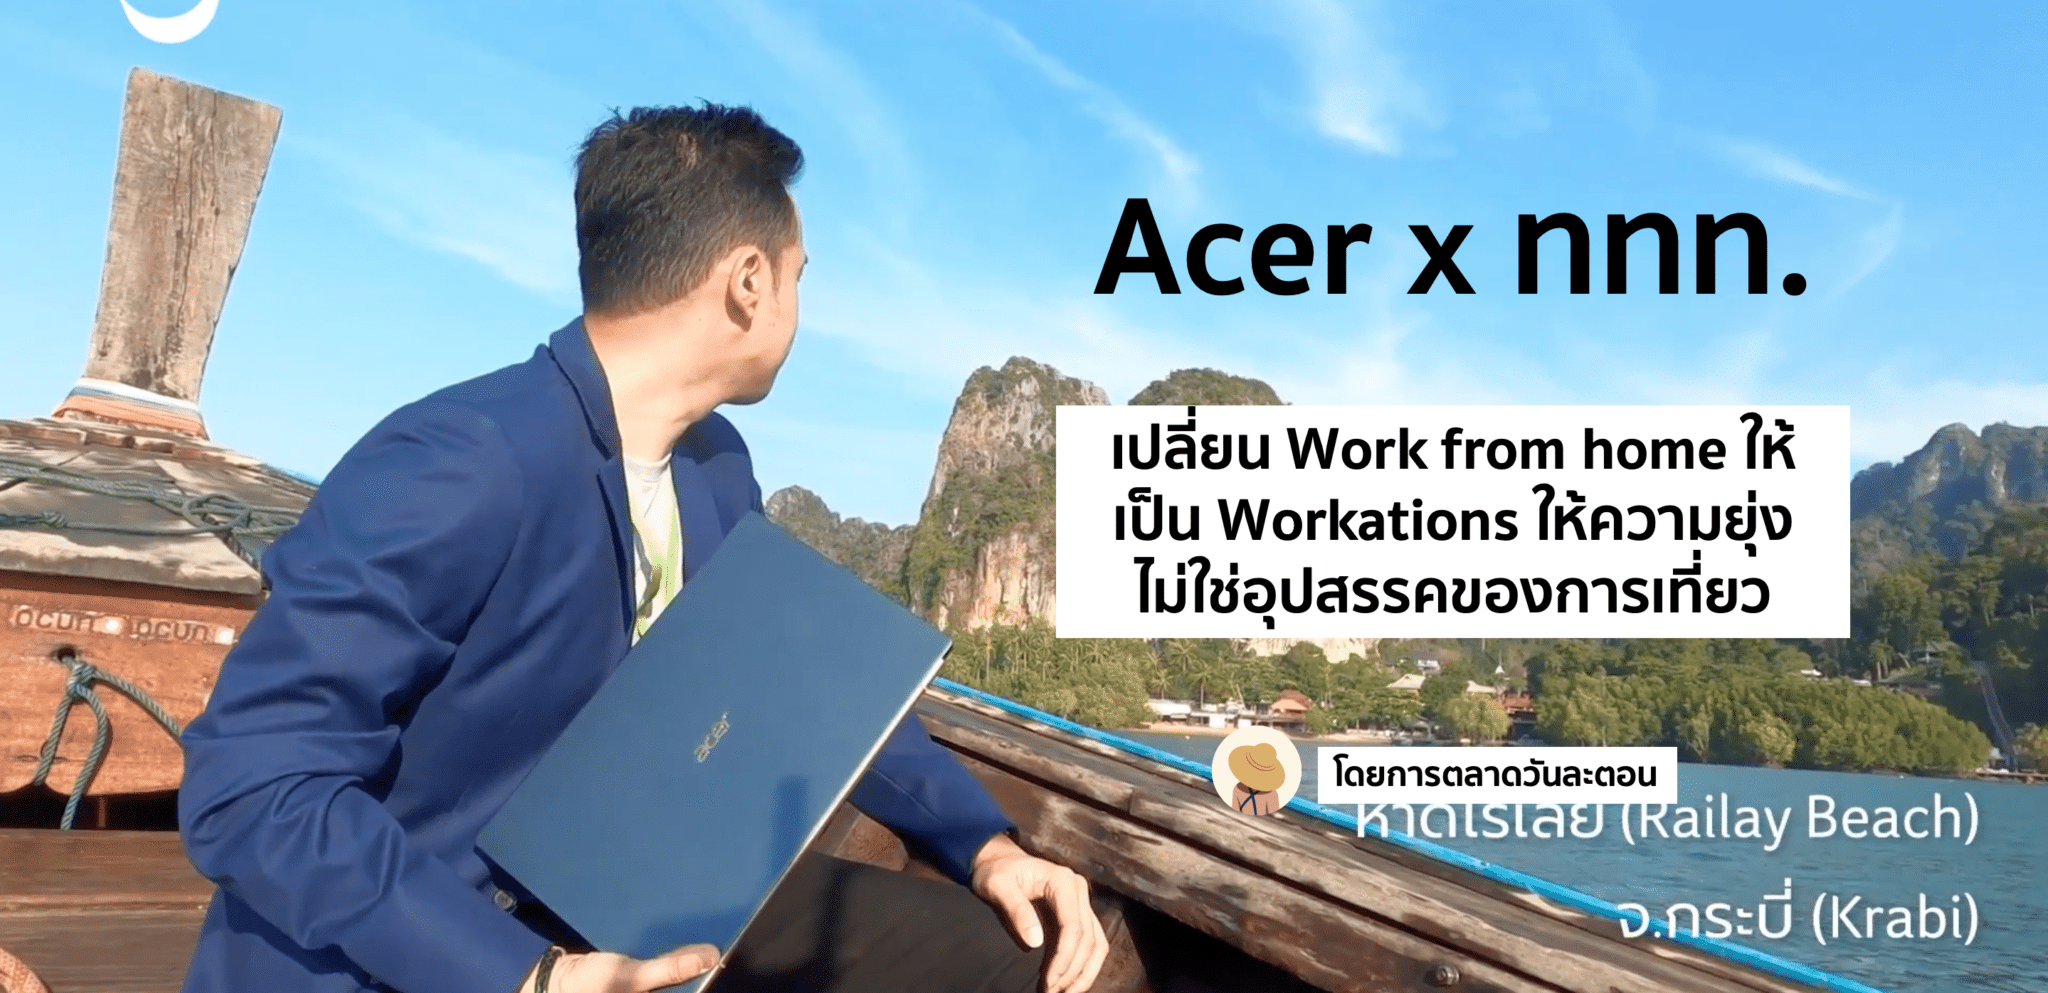 Acer จับมือ ททท. เปลี่ยน Work from Home เป็น Workations